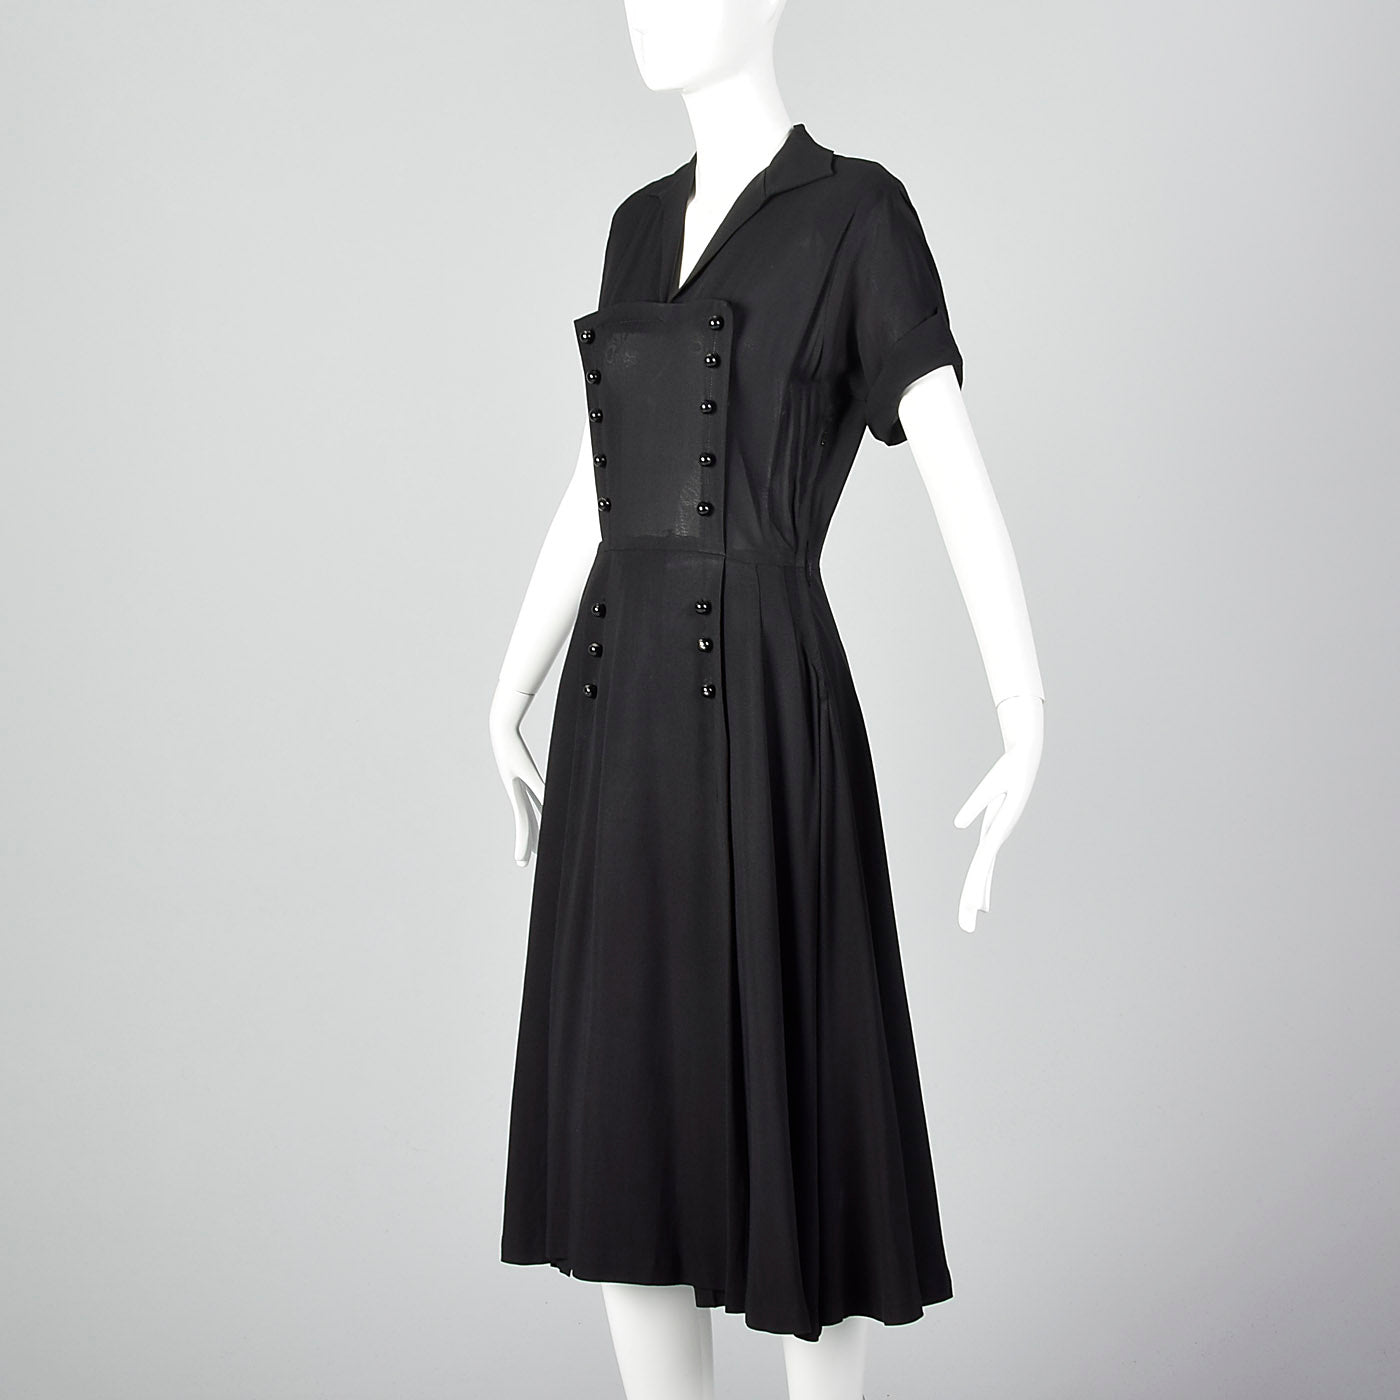 1950s Black Dress with Double Breasted Decorative Buttons